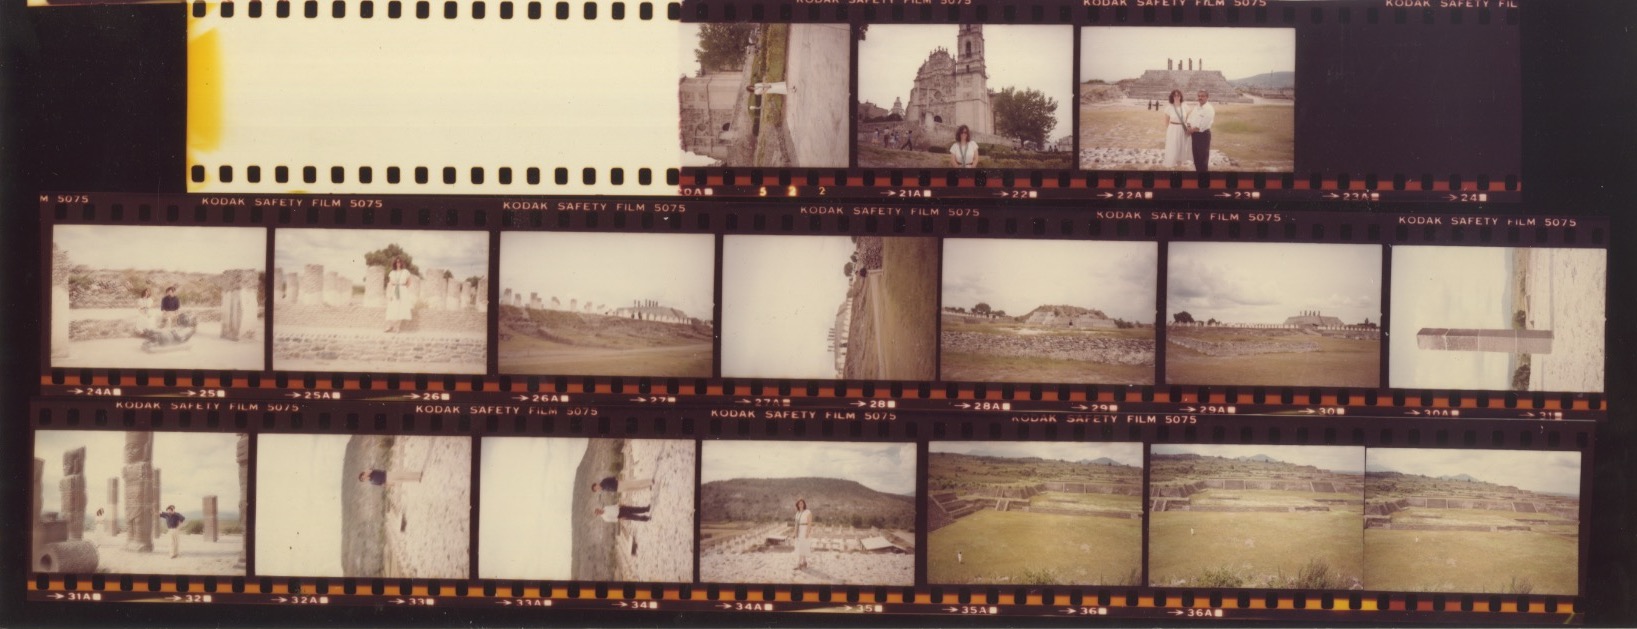 Contact sheet of images of Tula, Mexico